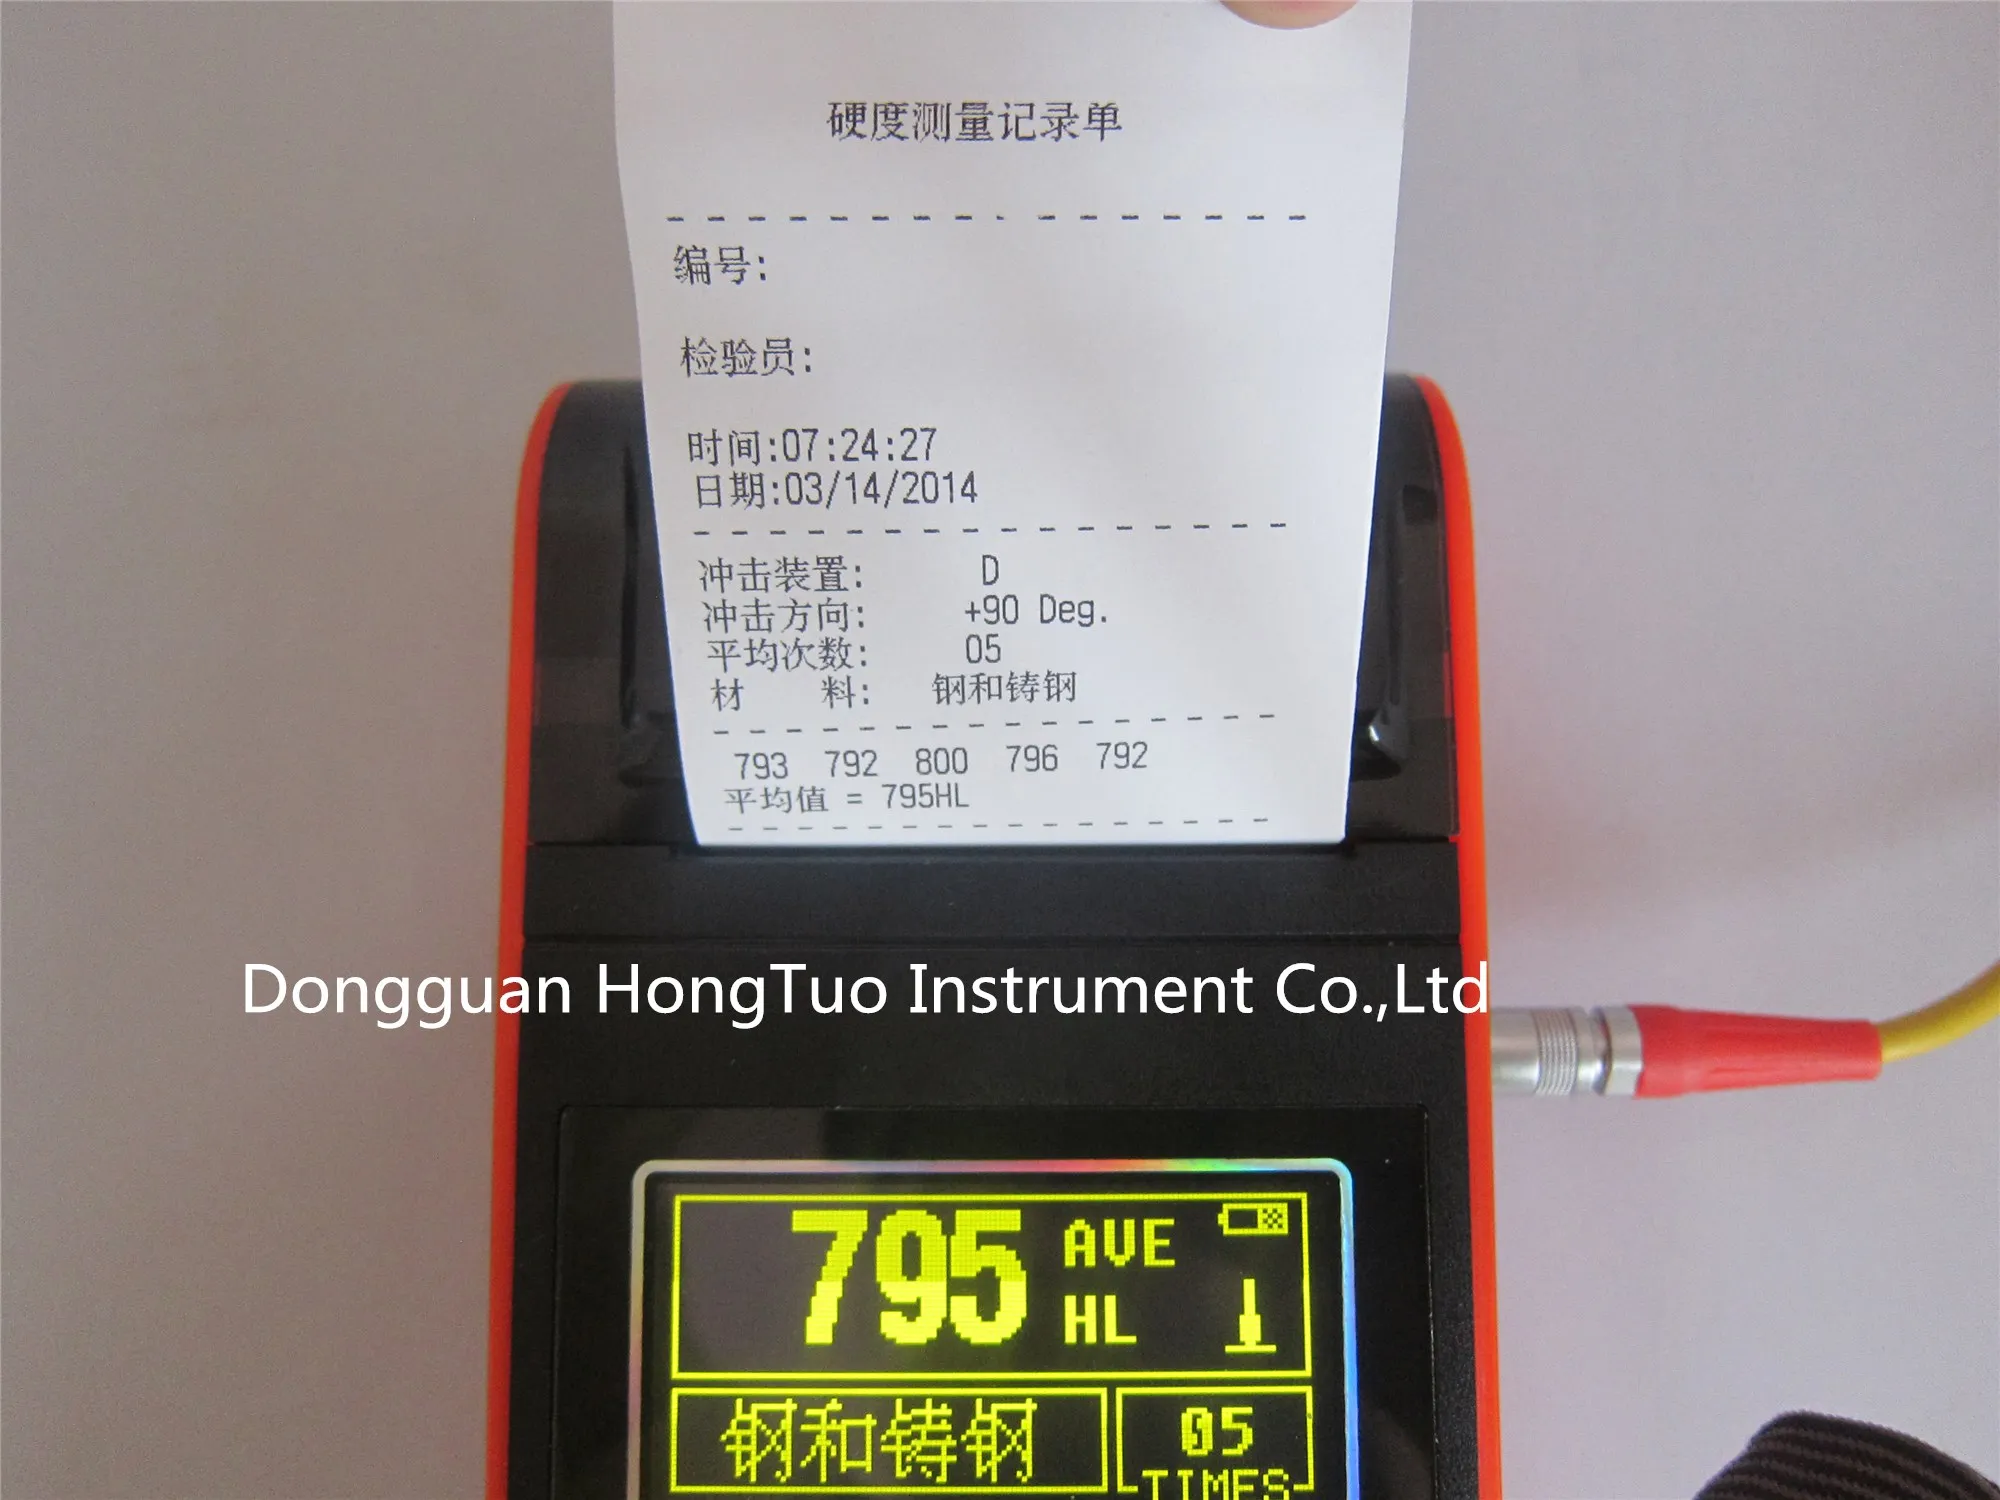 Factory Directs Hardness Tester Price,Hardness Tester Digital With CE Approved